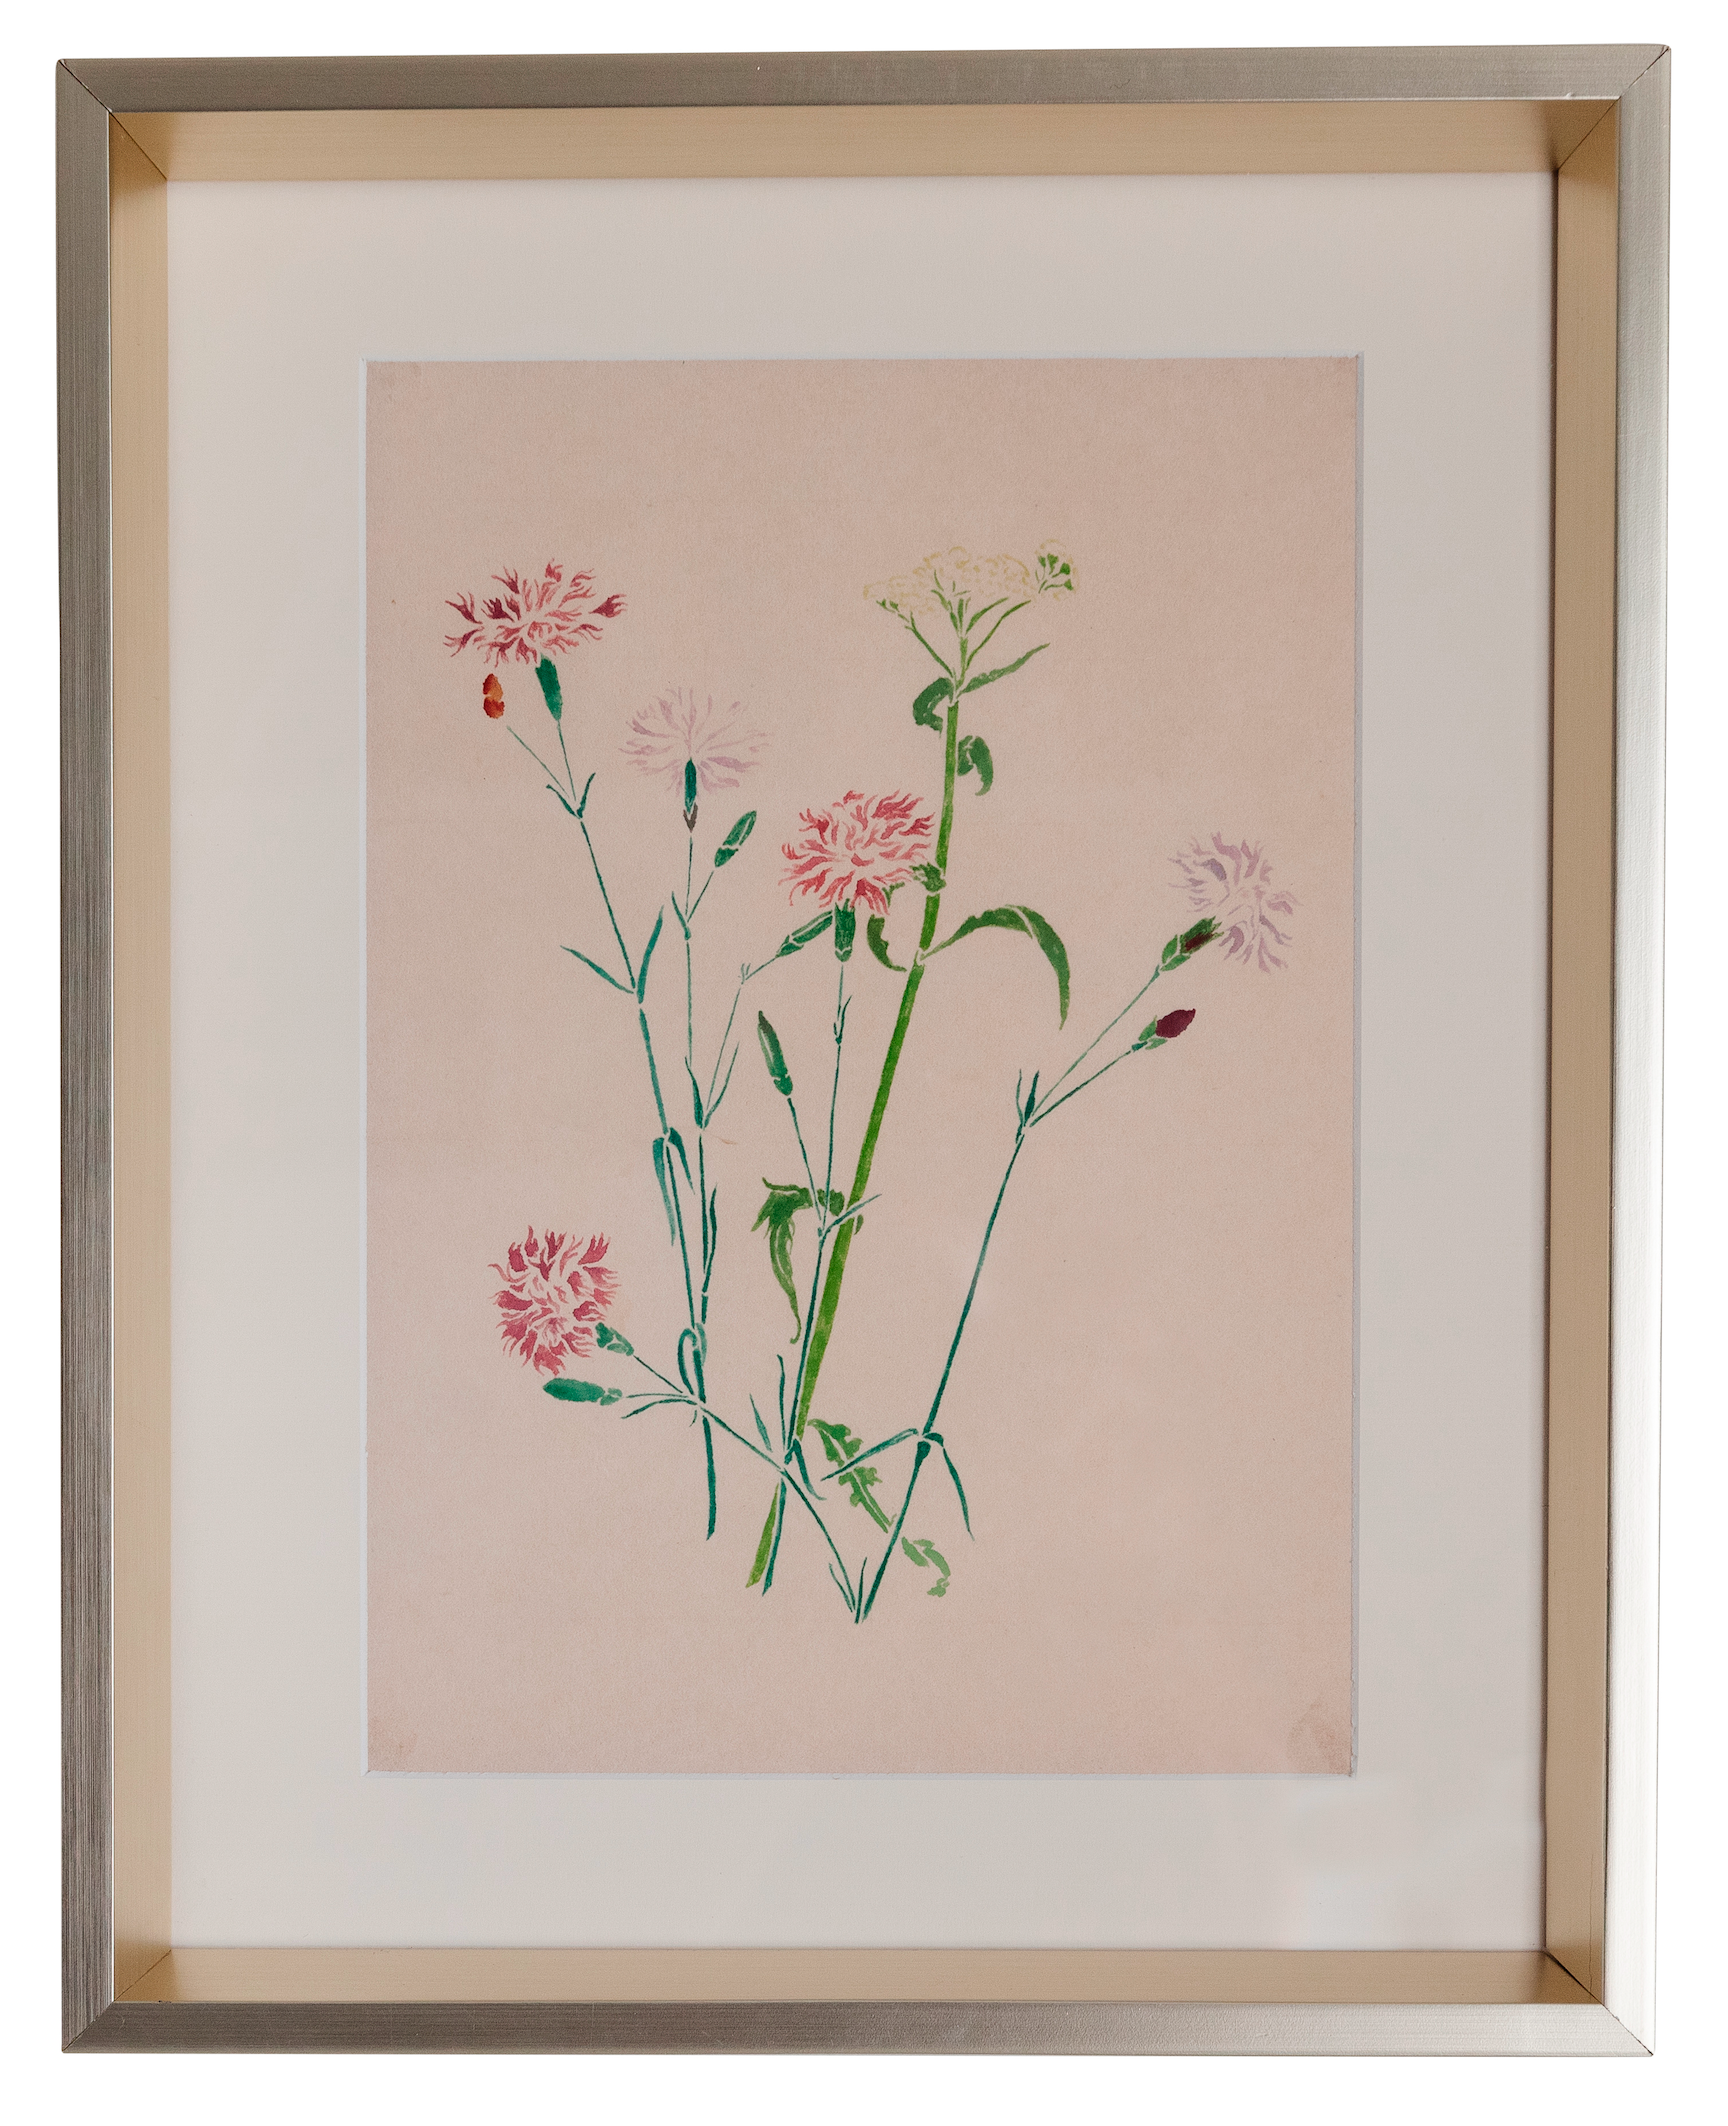 Botanical Giclee Prints on Hahnemuhle Paper Newly Matted and Framed